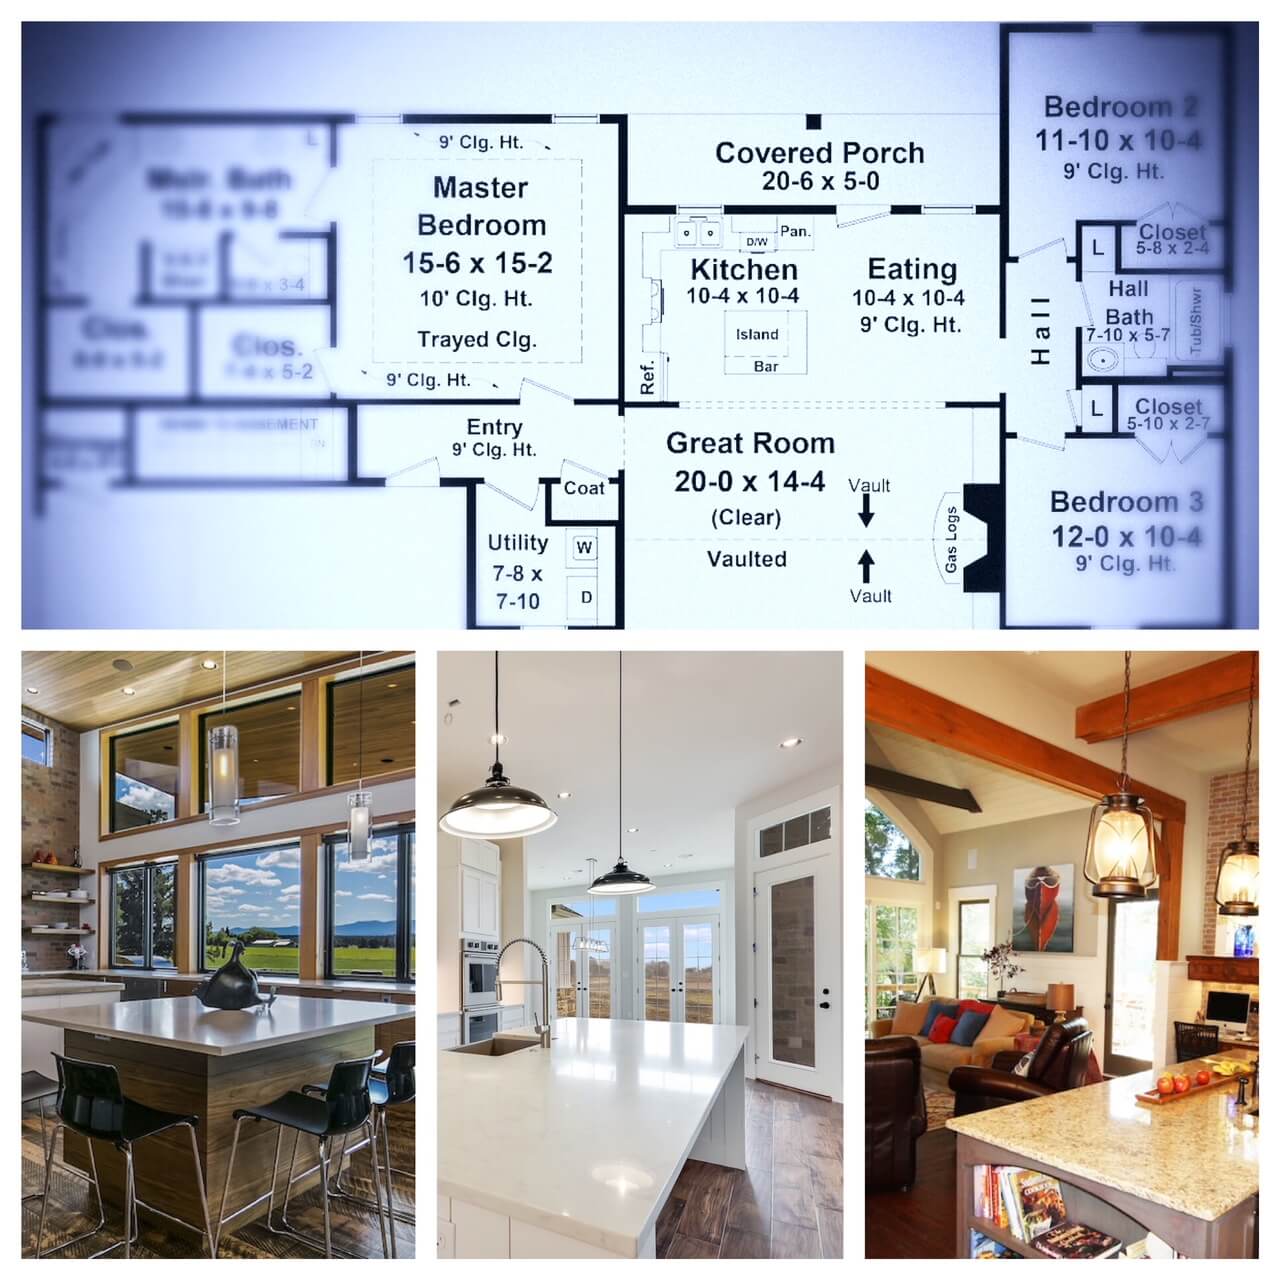 An example of house floor plan blueprints and the wide variety of kitchen design options and styles available from small to large budgets.